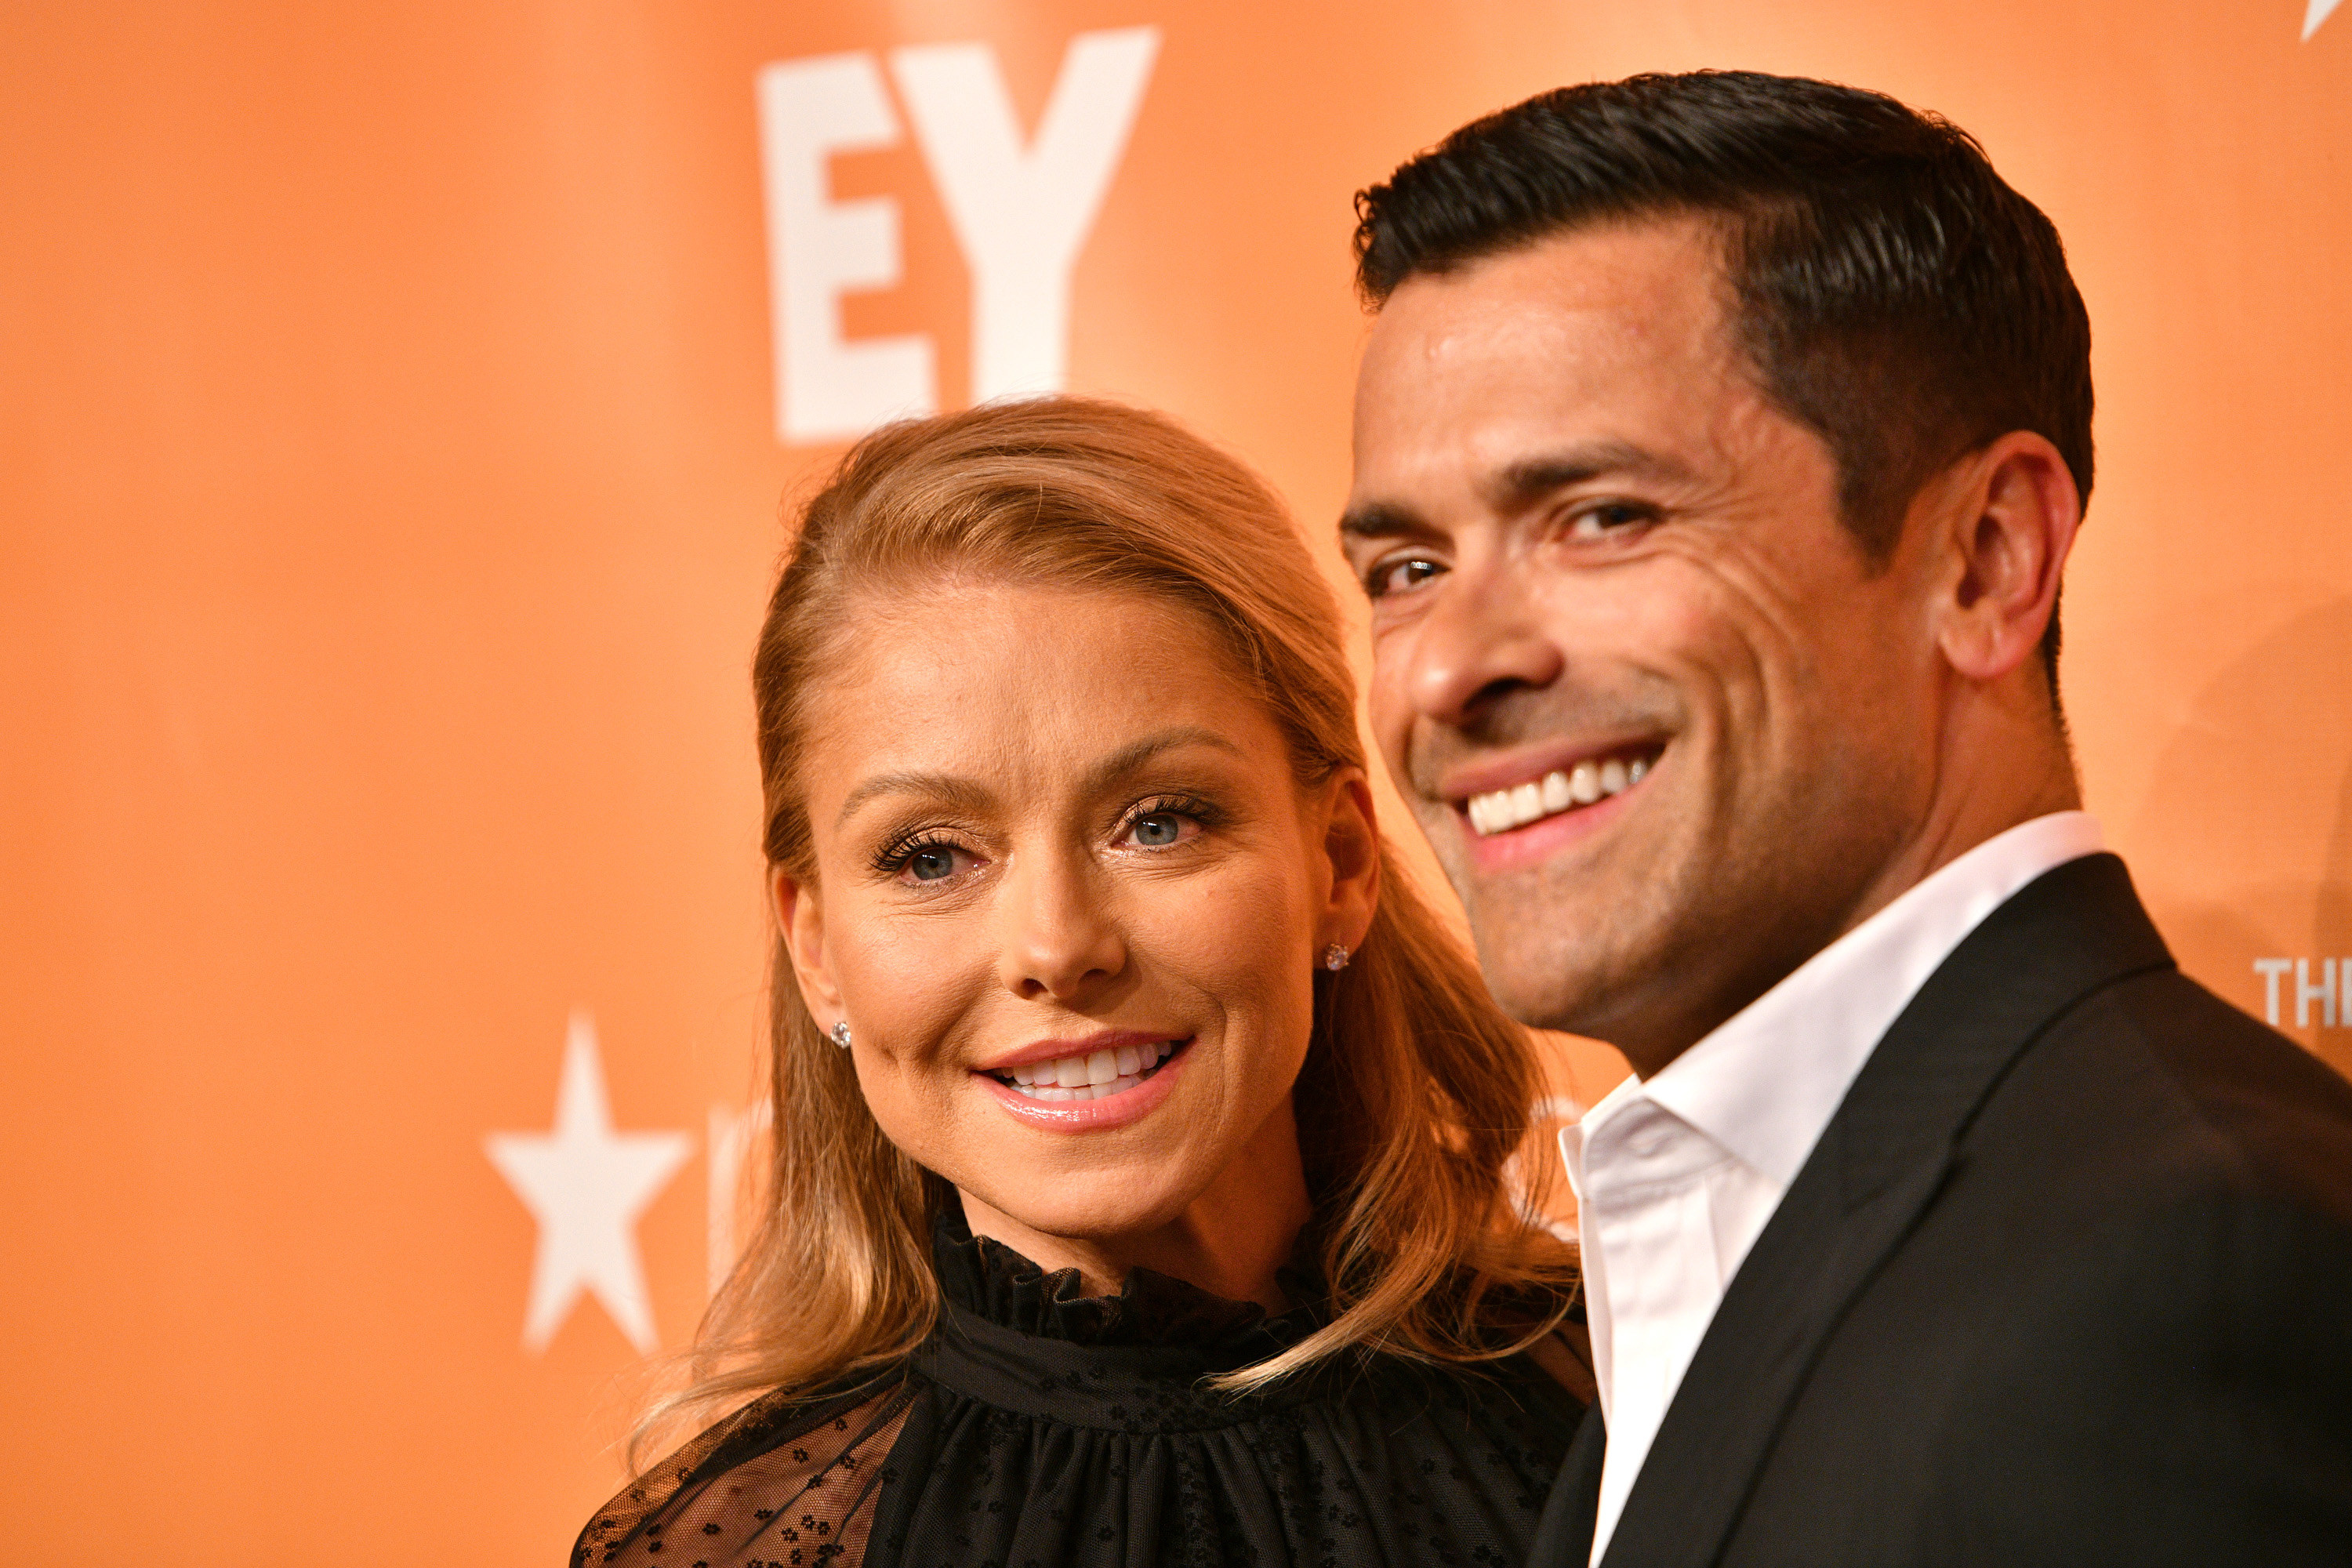 Kelly Ripa and Mark Conseuolos pose in formal wear at an event